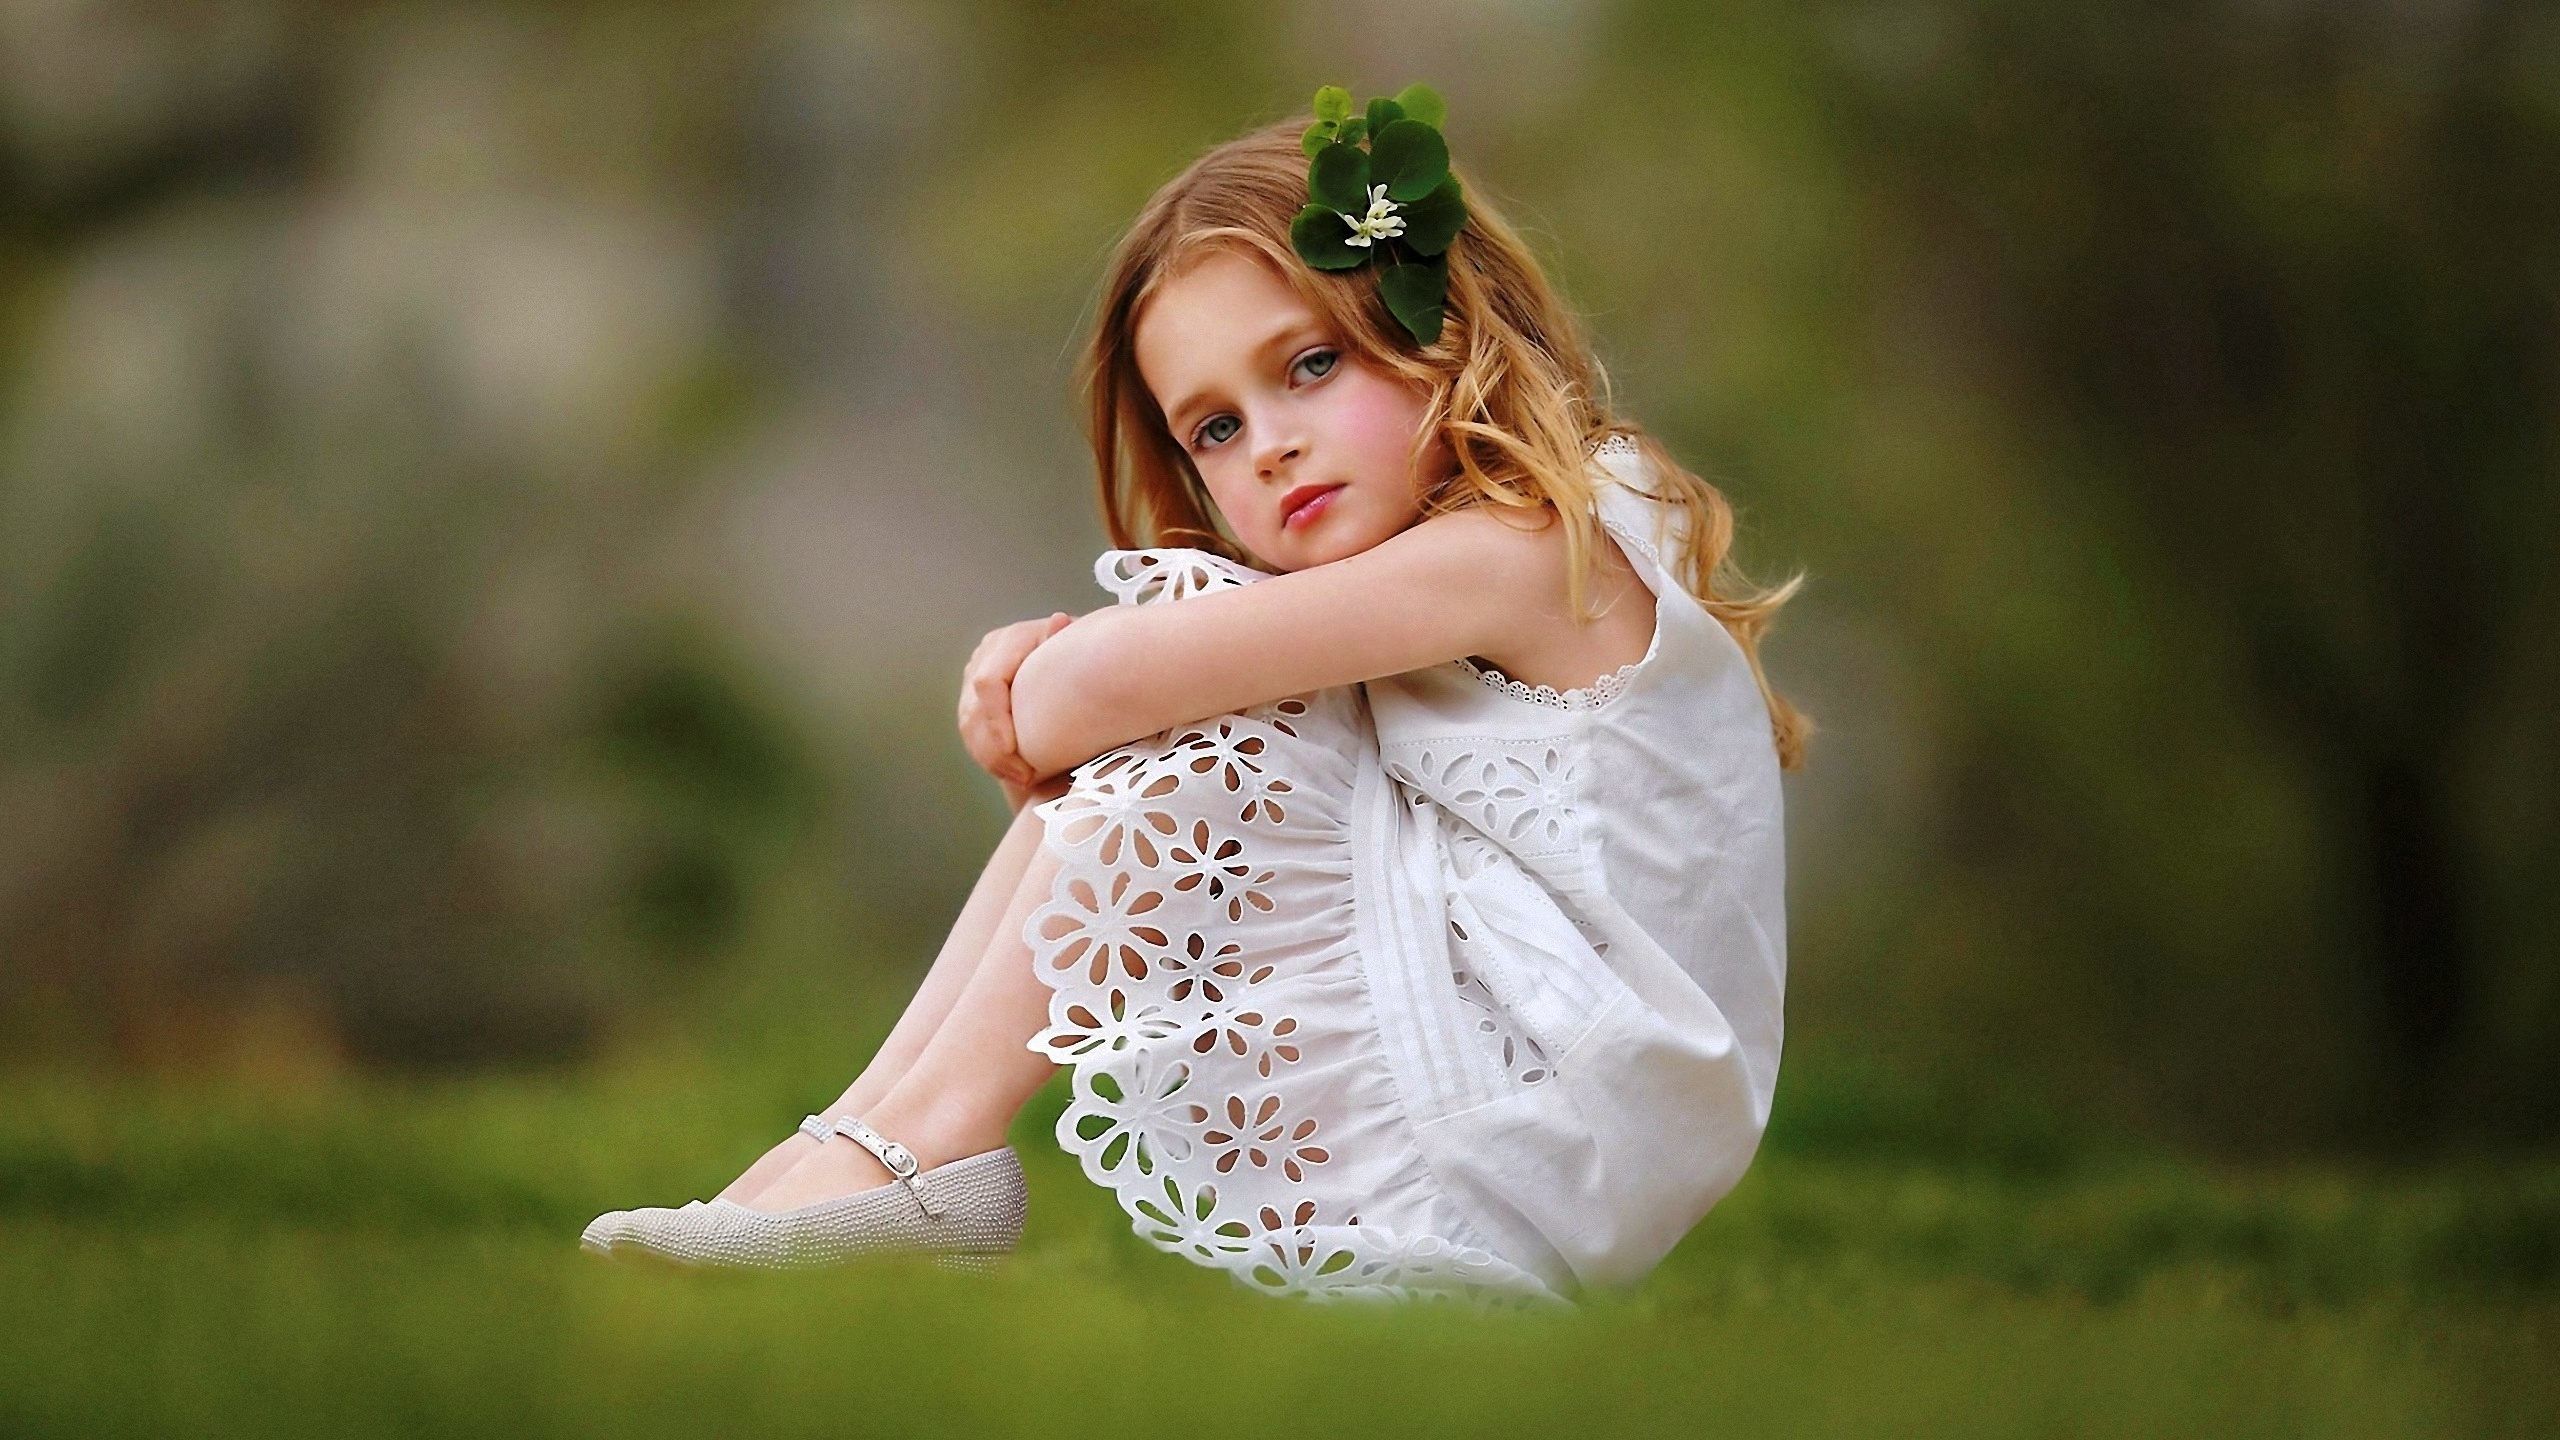 Nice Picture Baby Girl 2560×1440 Wallpaper Girl Image Free Download